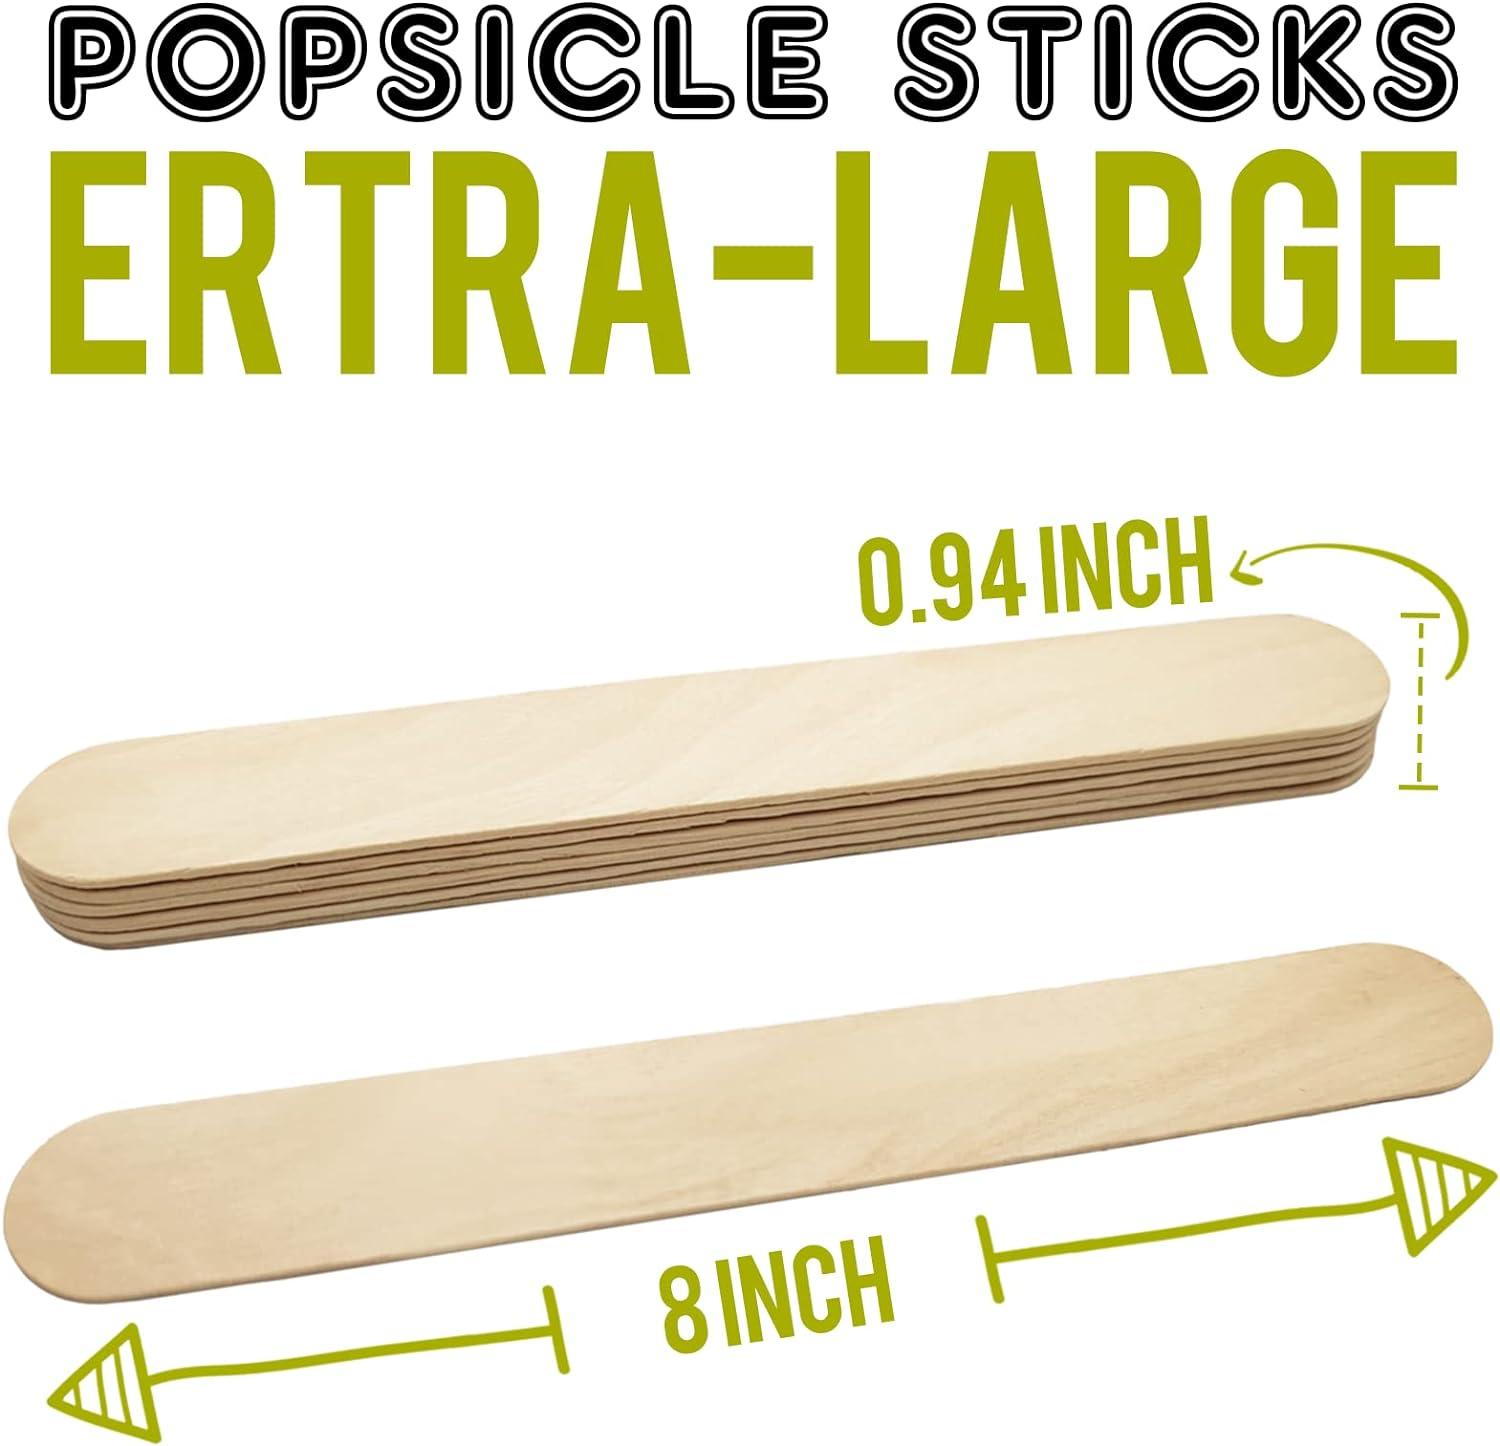 WISYOK 240 Pcs Colored Popsicle Sticks for Crafts, 4.5 Inch Colored Wooden  Craft Sticks, Ice Cream Sticks, Rainbow Popsicle Sticks, Great for DIY